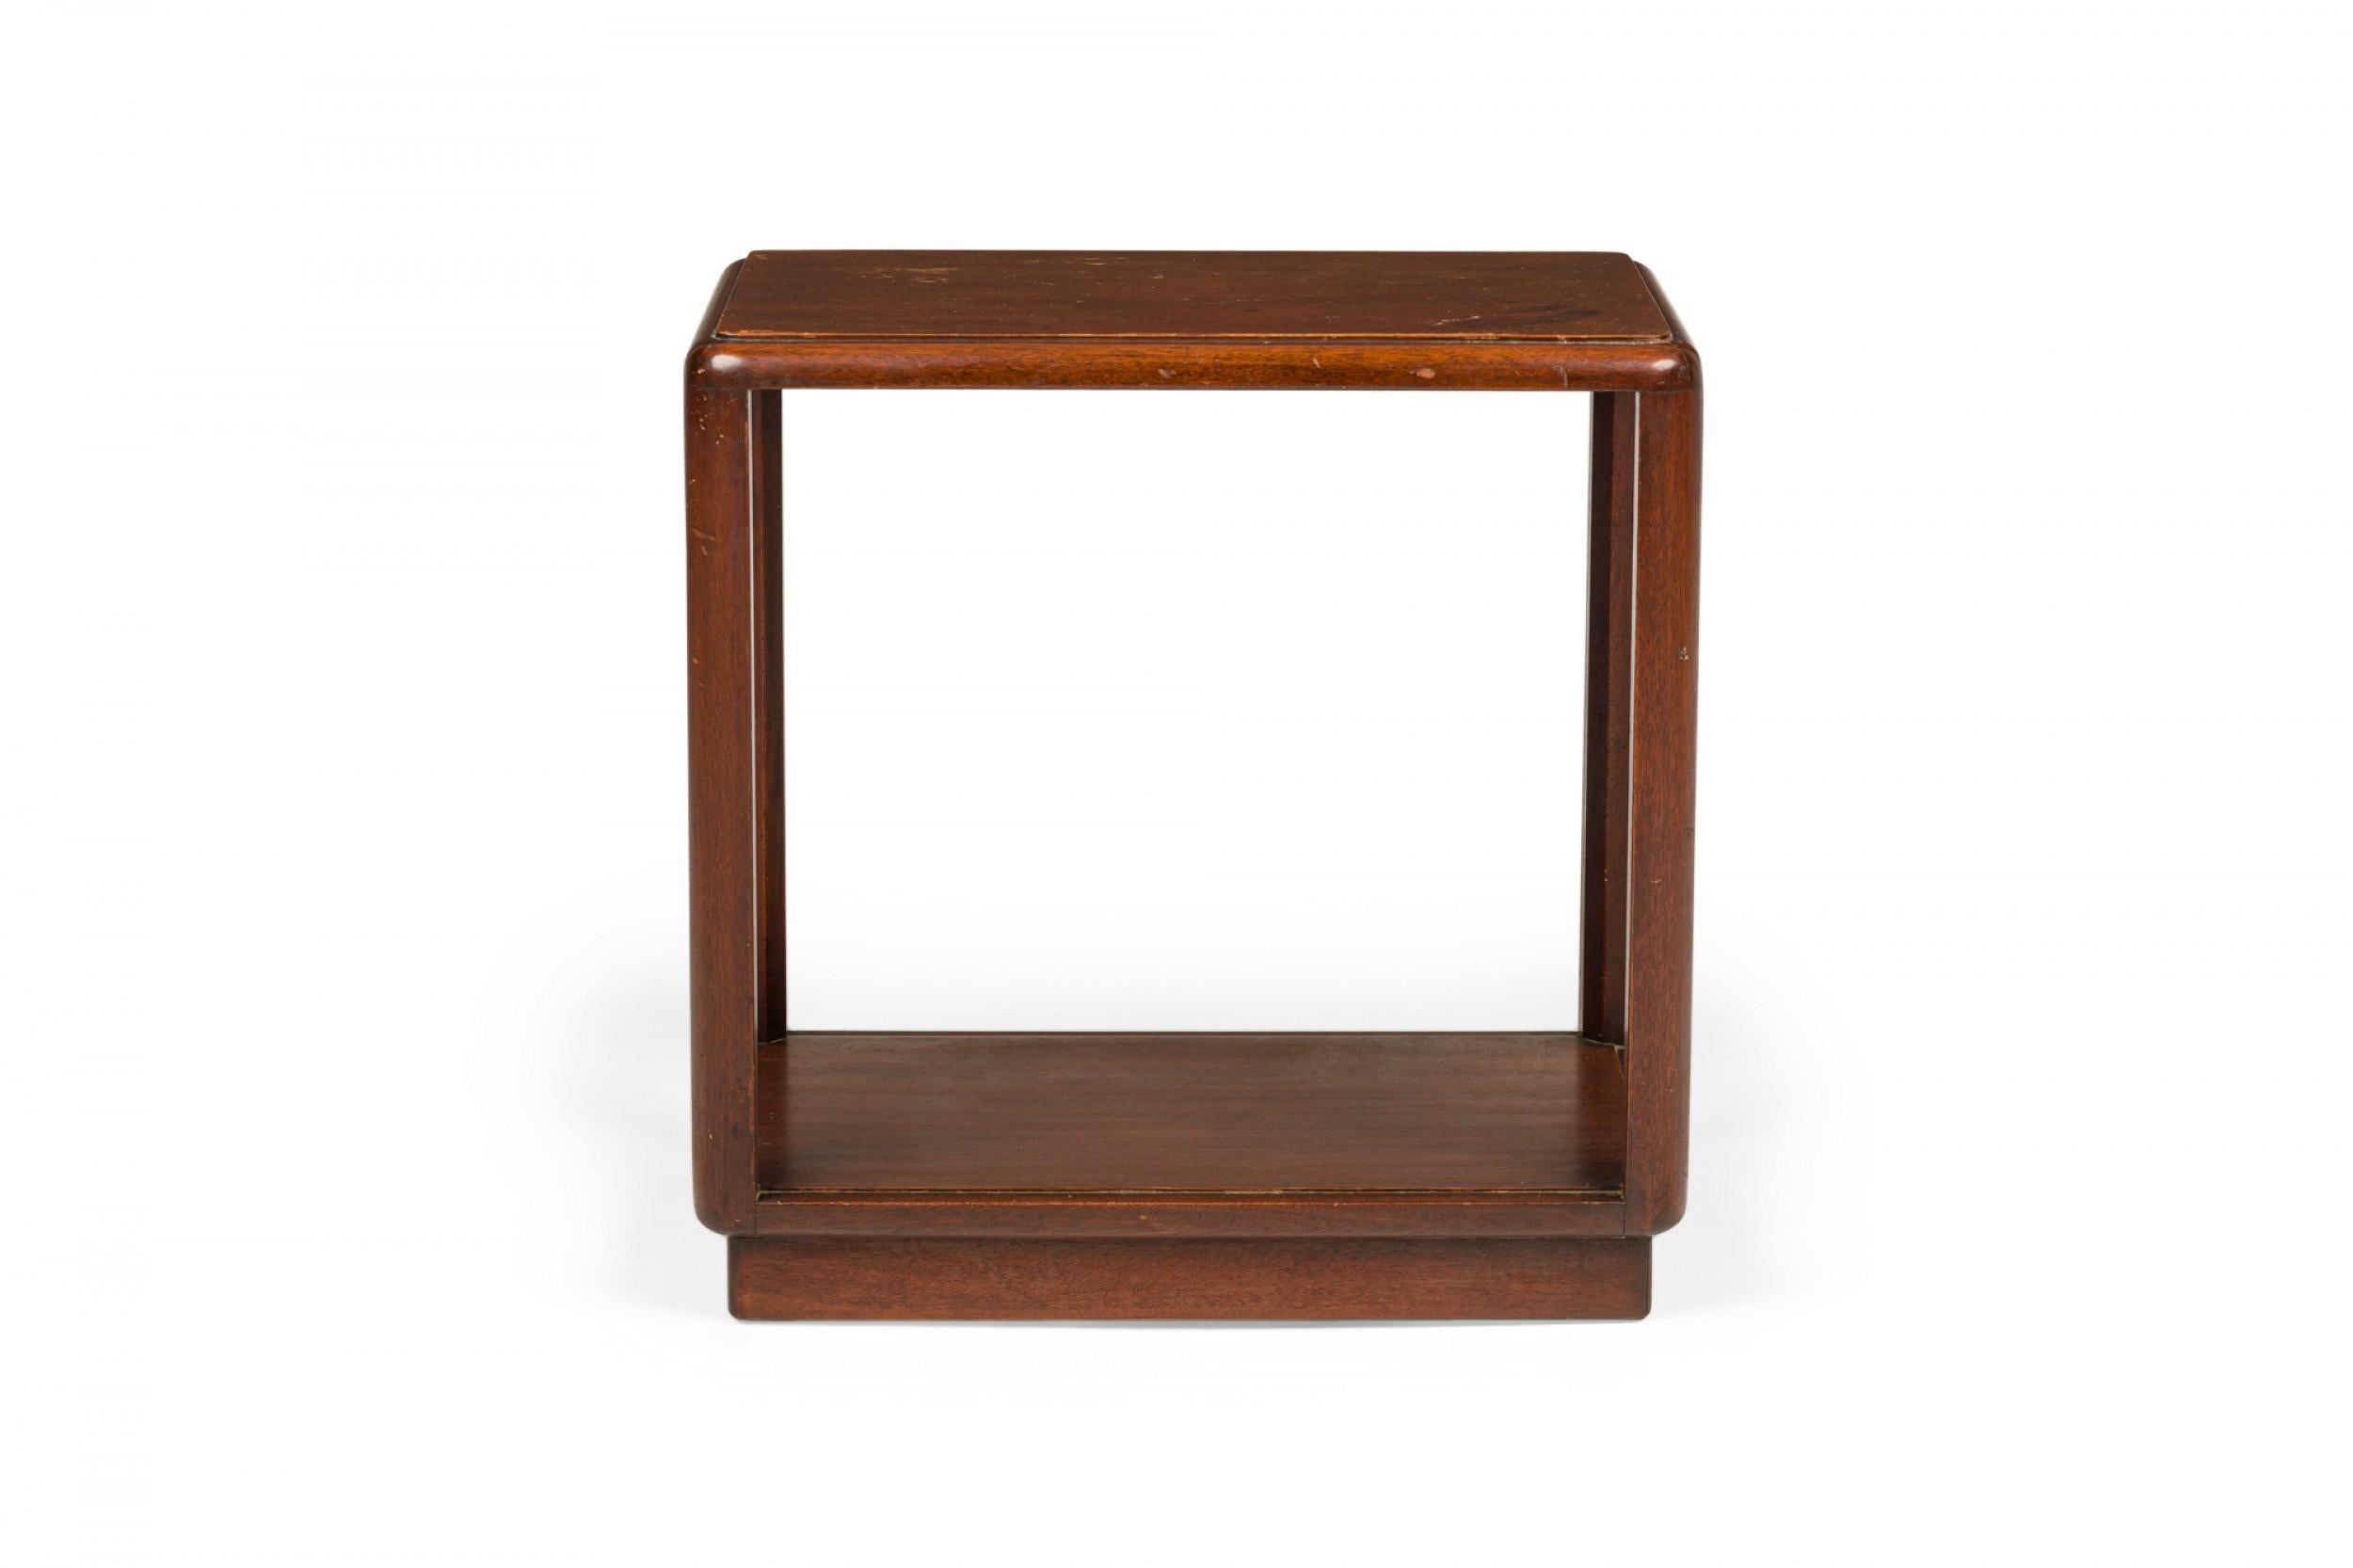 American Mid-Century wooden end / side tables with a rectangular top with rounded corners, a pedestal base, and an open frame design. (EDWARD WORMLEY FOR DUNBAR FURNITURE COMPANY)(Similar tables: DUF0751, DUF0752, DUF0753, DUF0754)